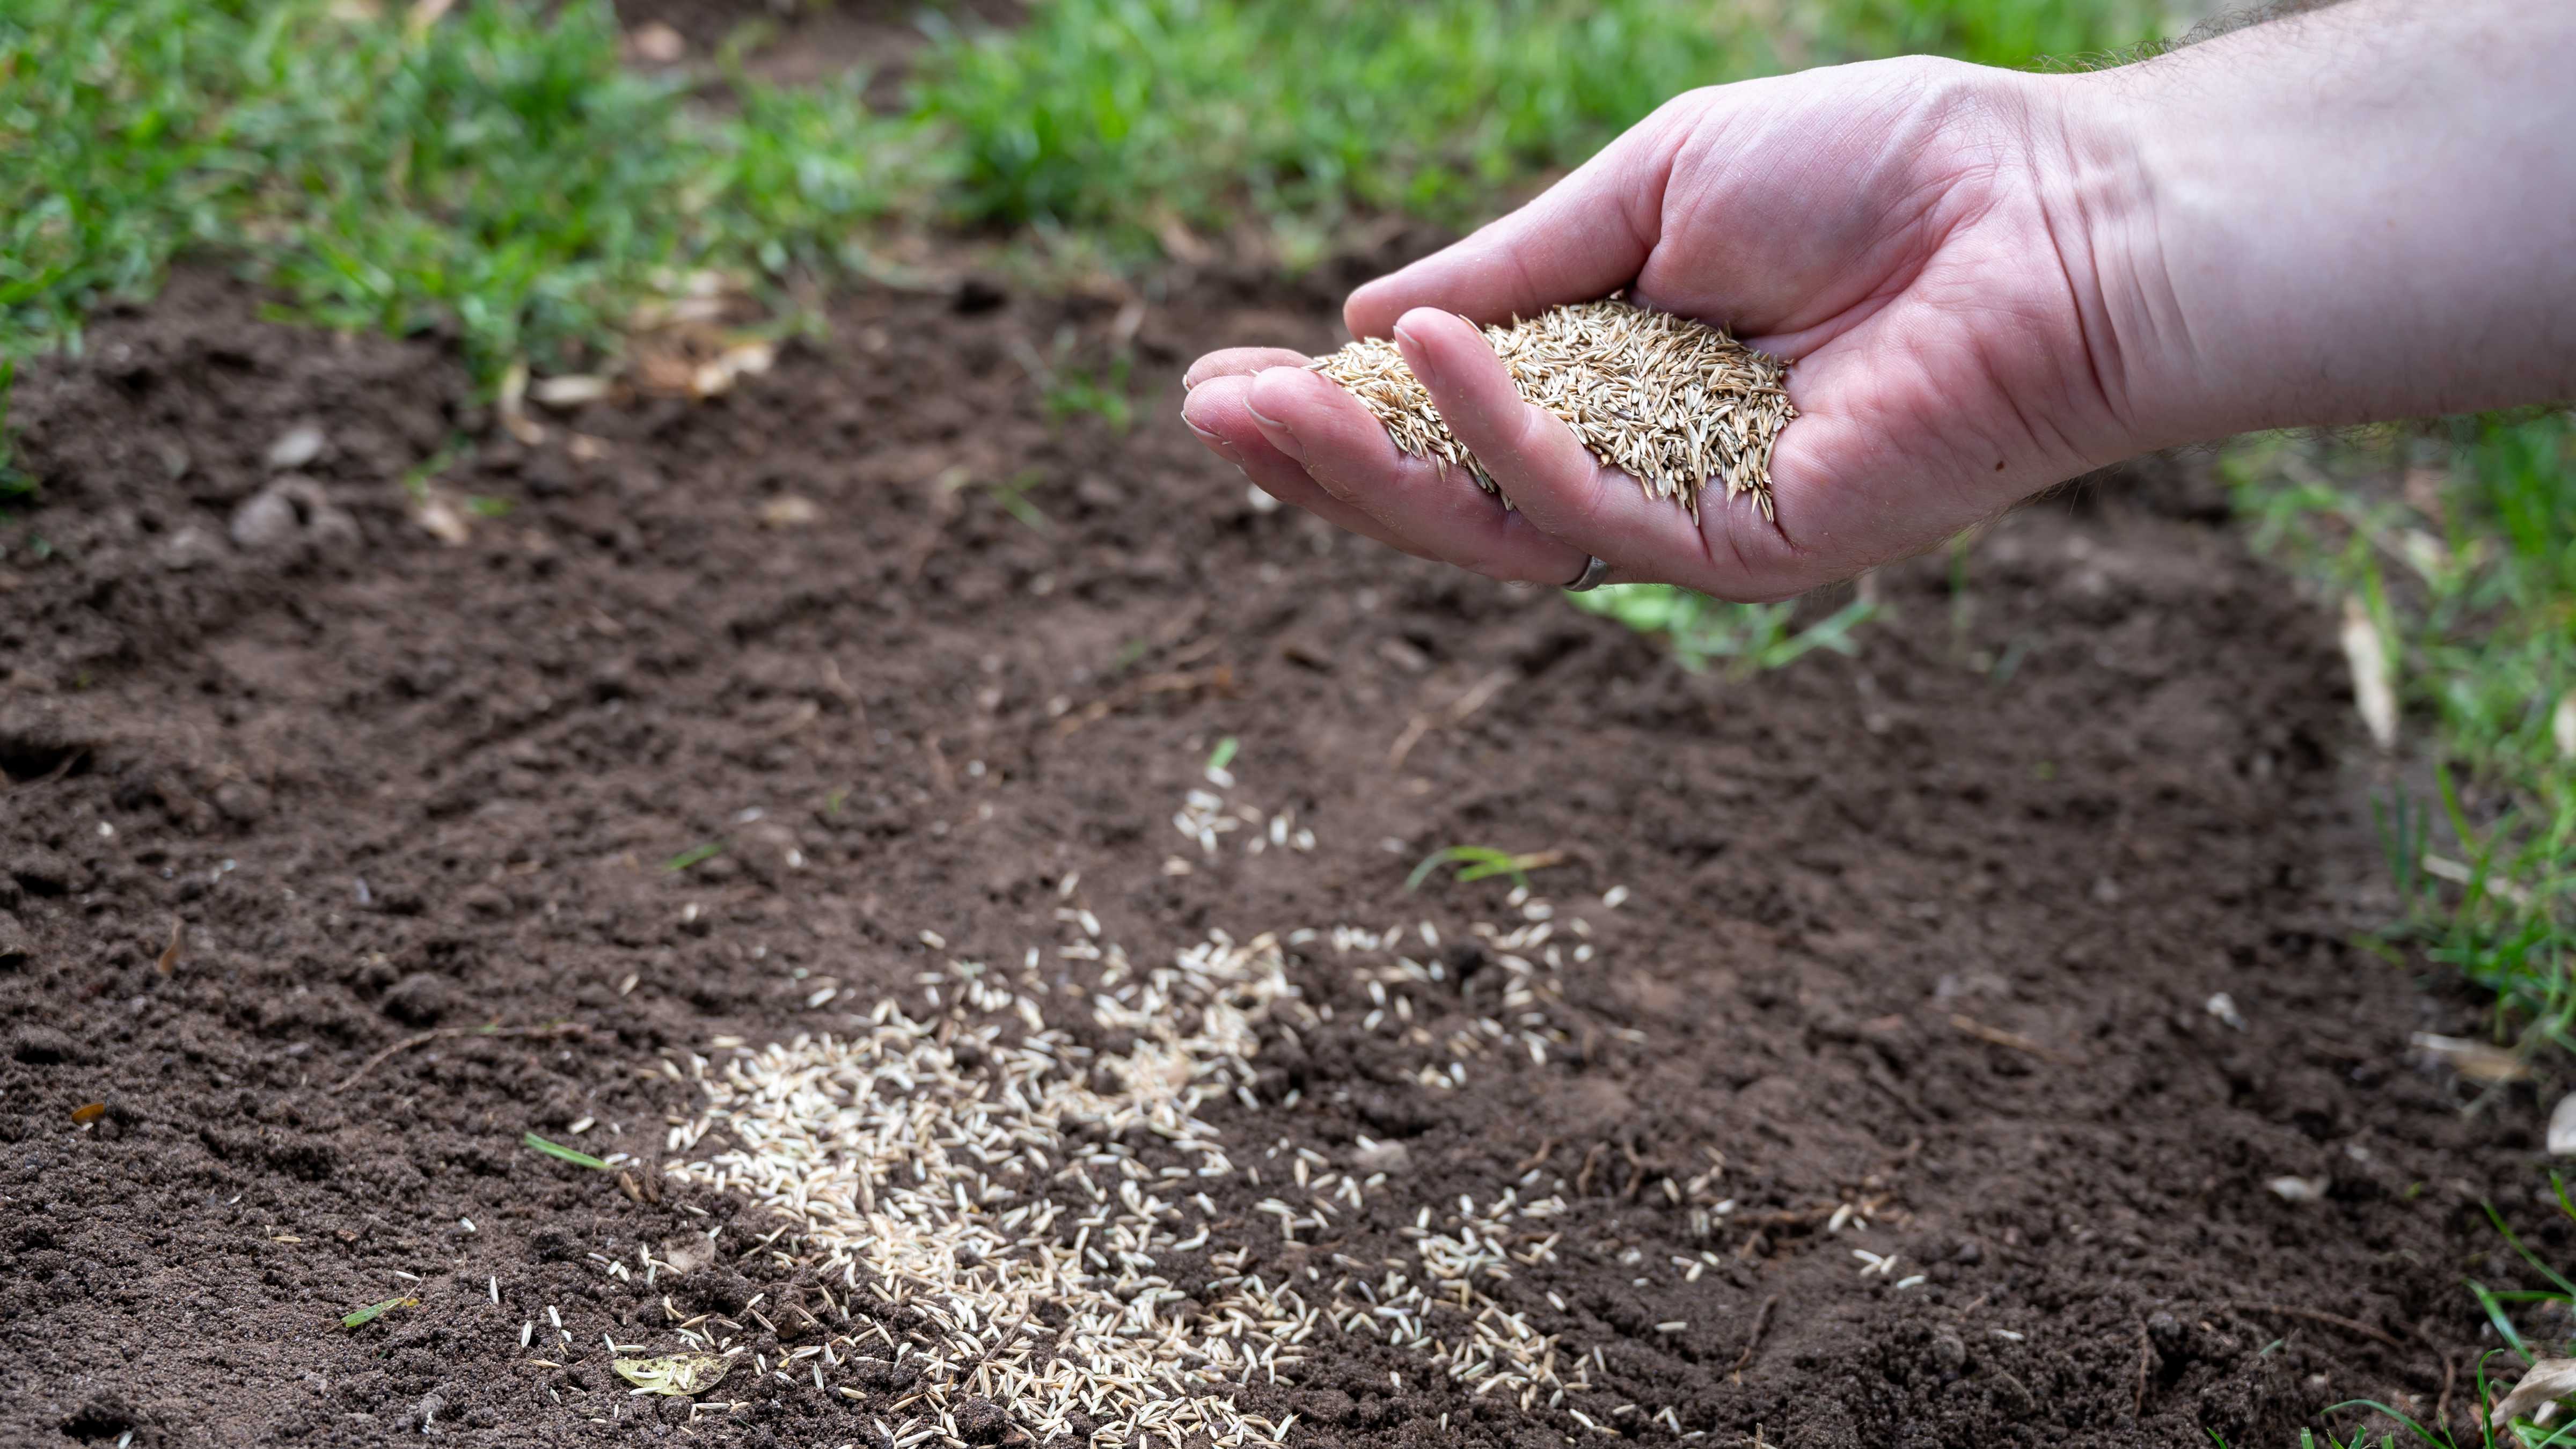 A patch of soil is being scattered with rye grass seed by a person holding a handful of seed. Image: Fokusiert / iStock.